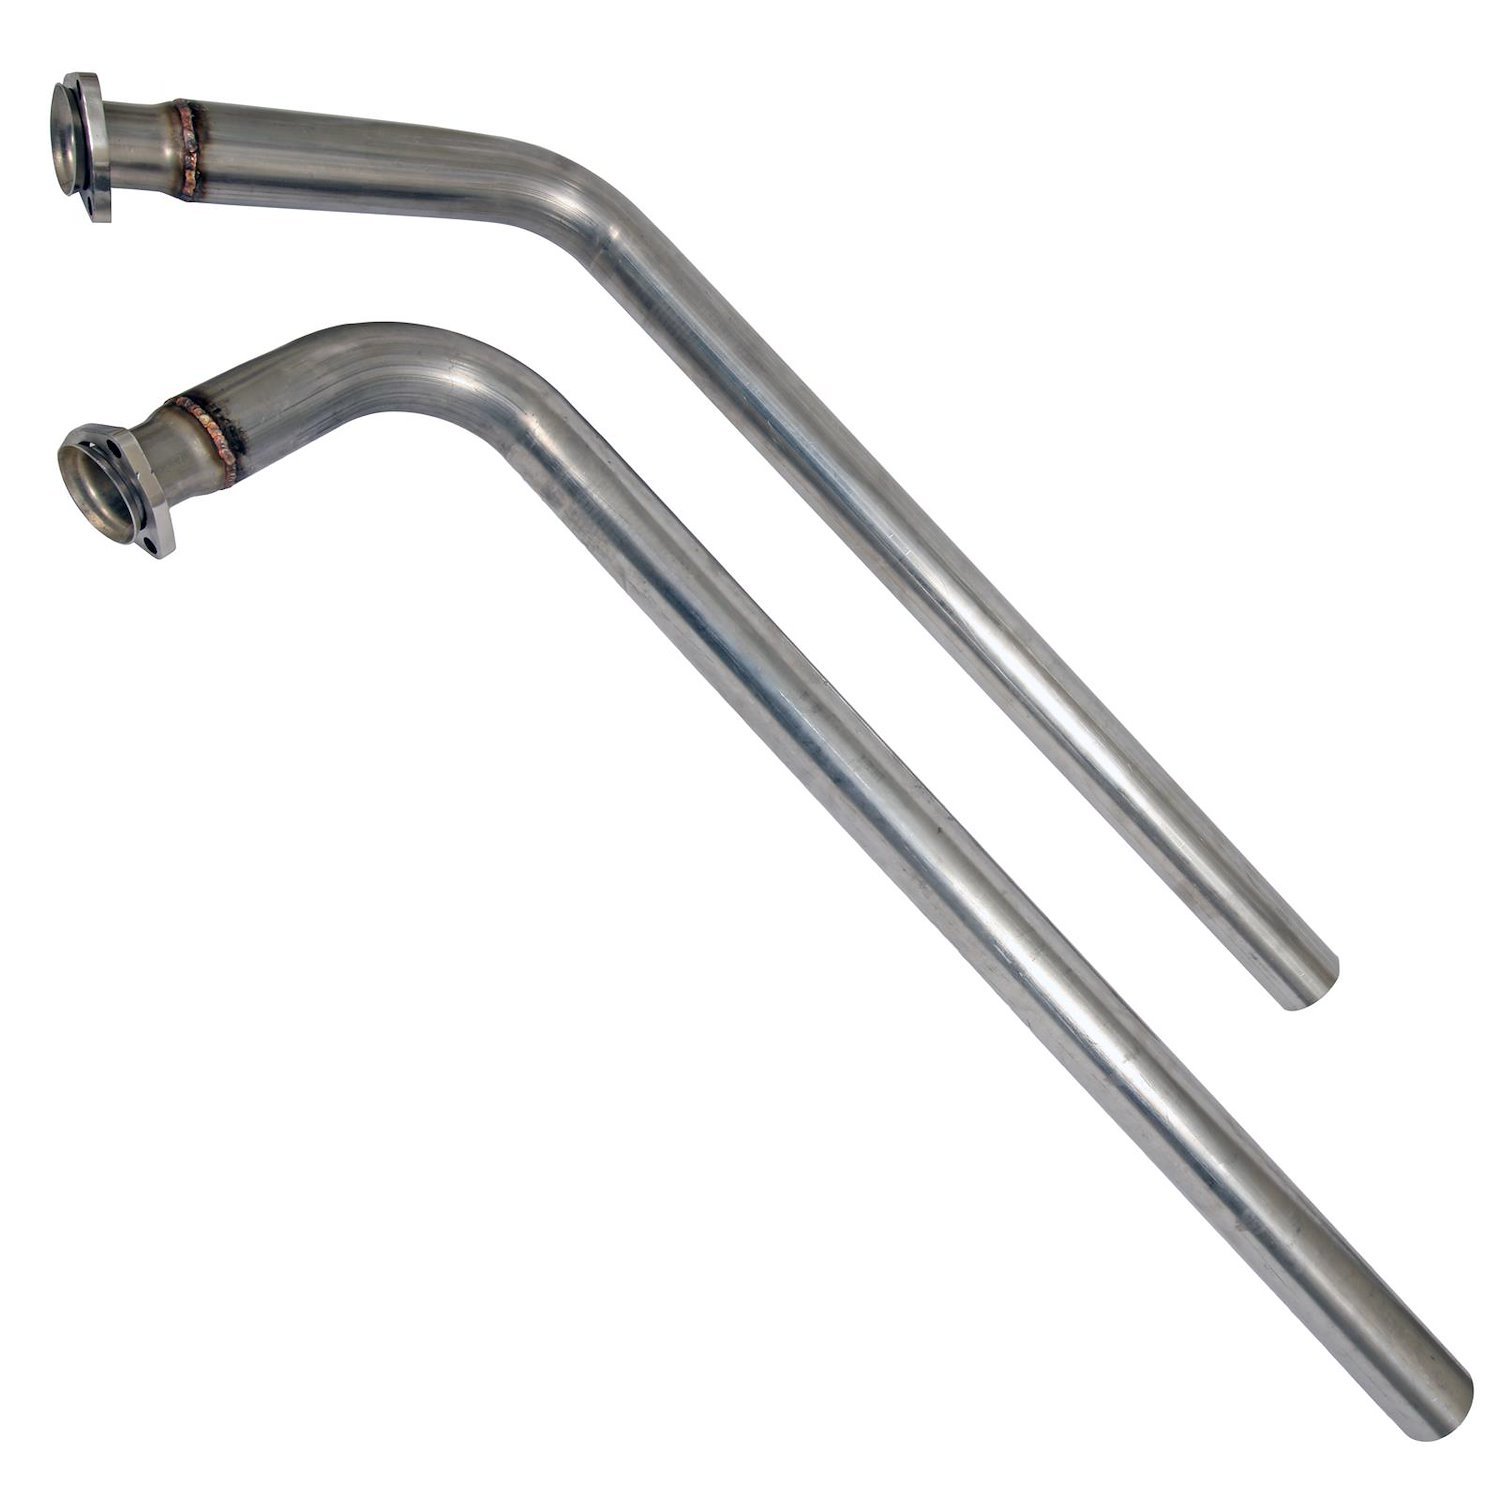 Exhaust Downpipes 1978-1988 Chevy Monte Carlo, GM G-Body Cars